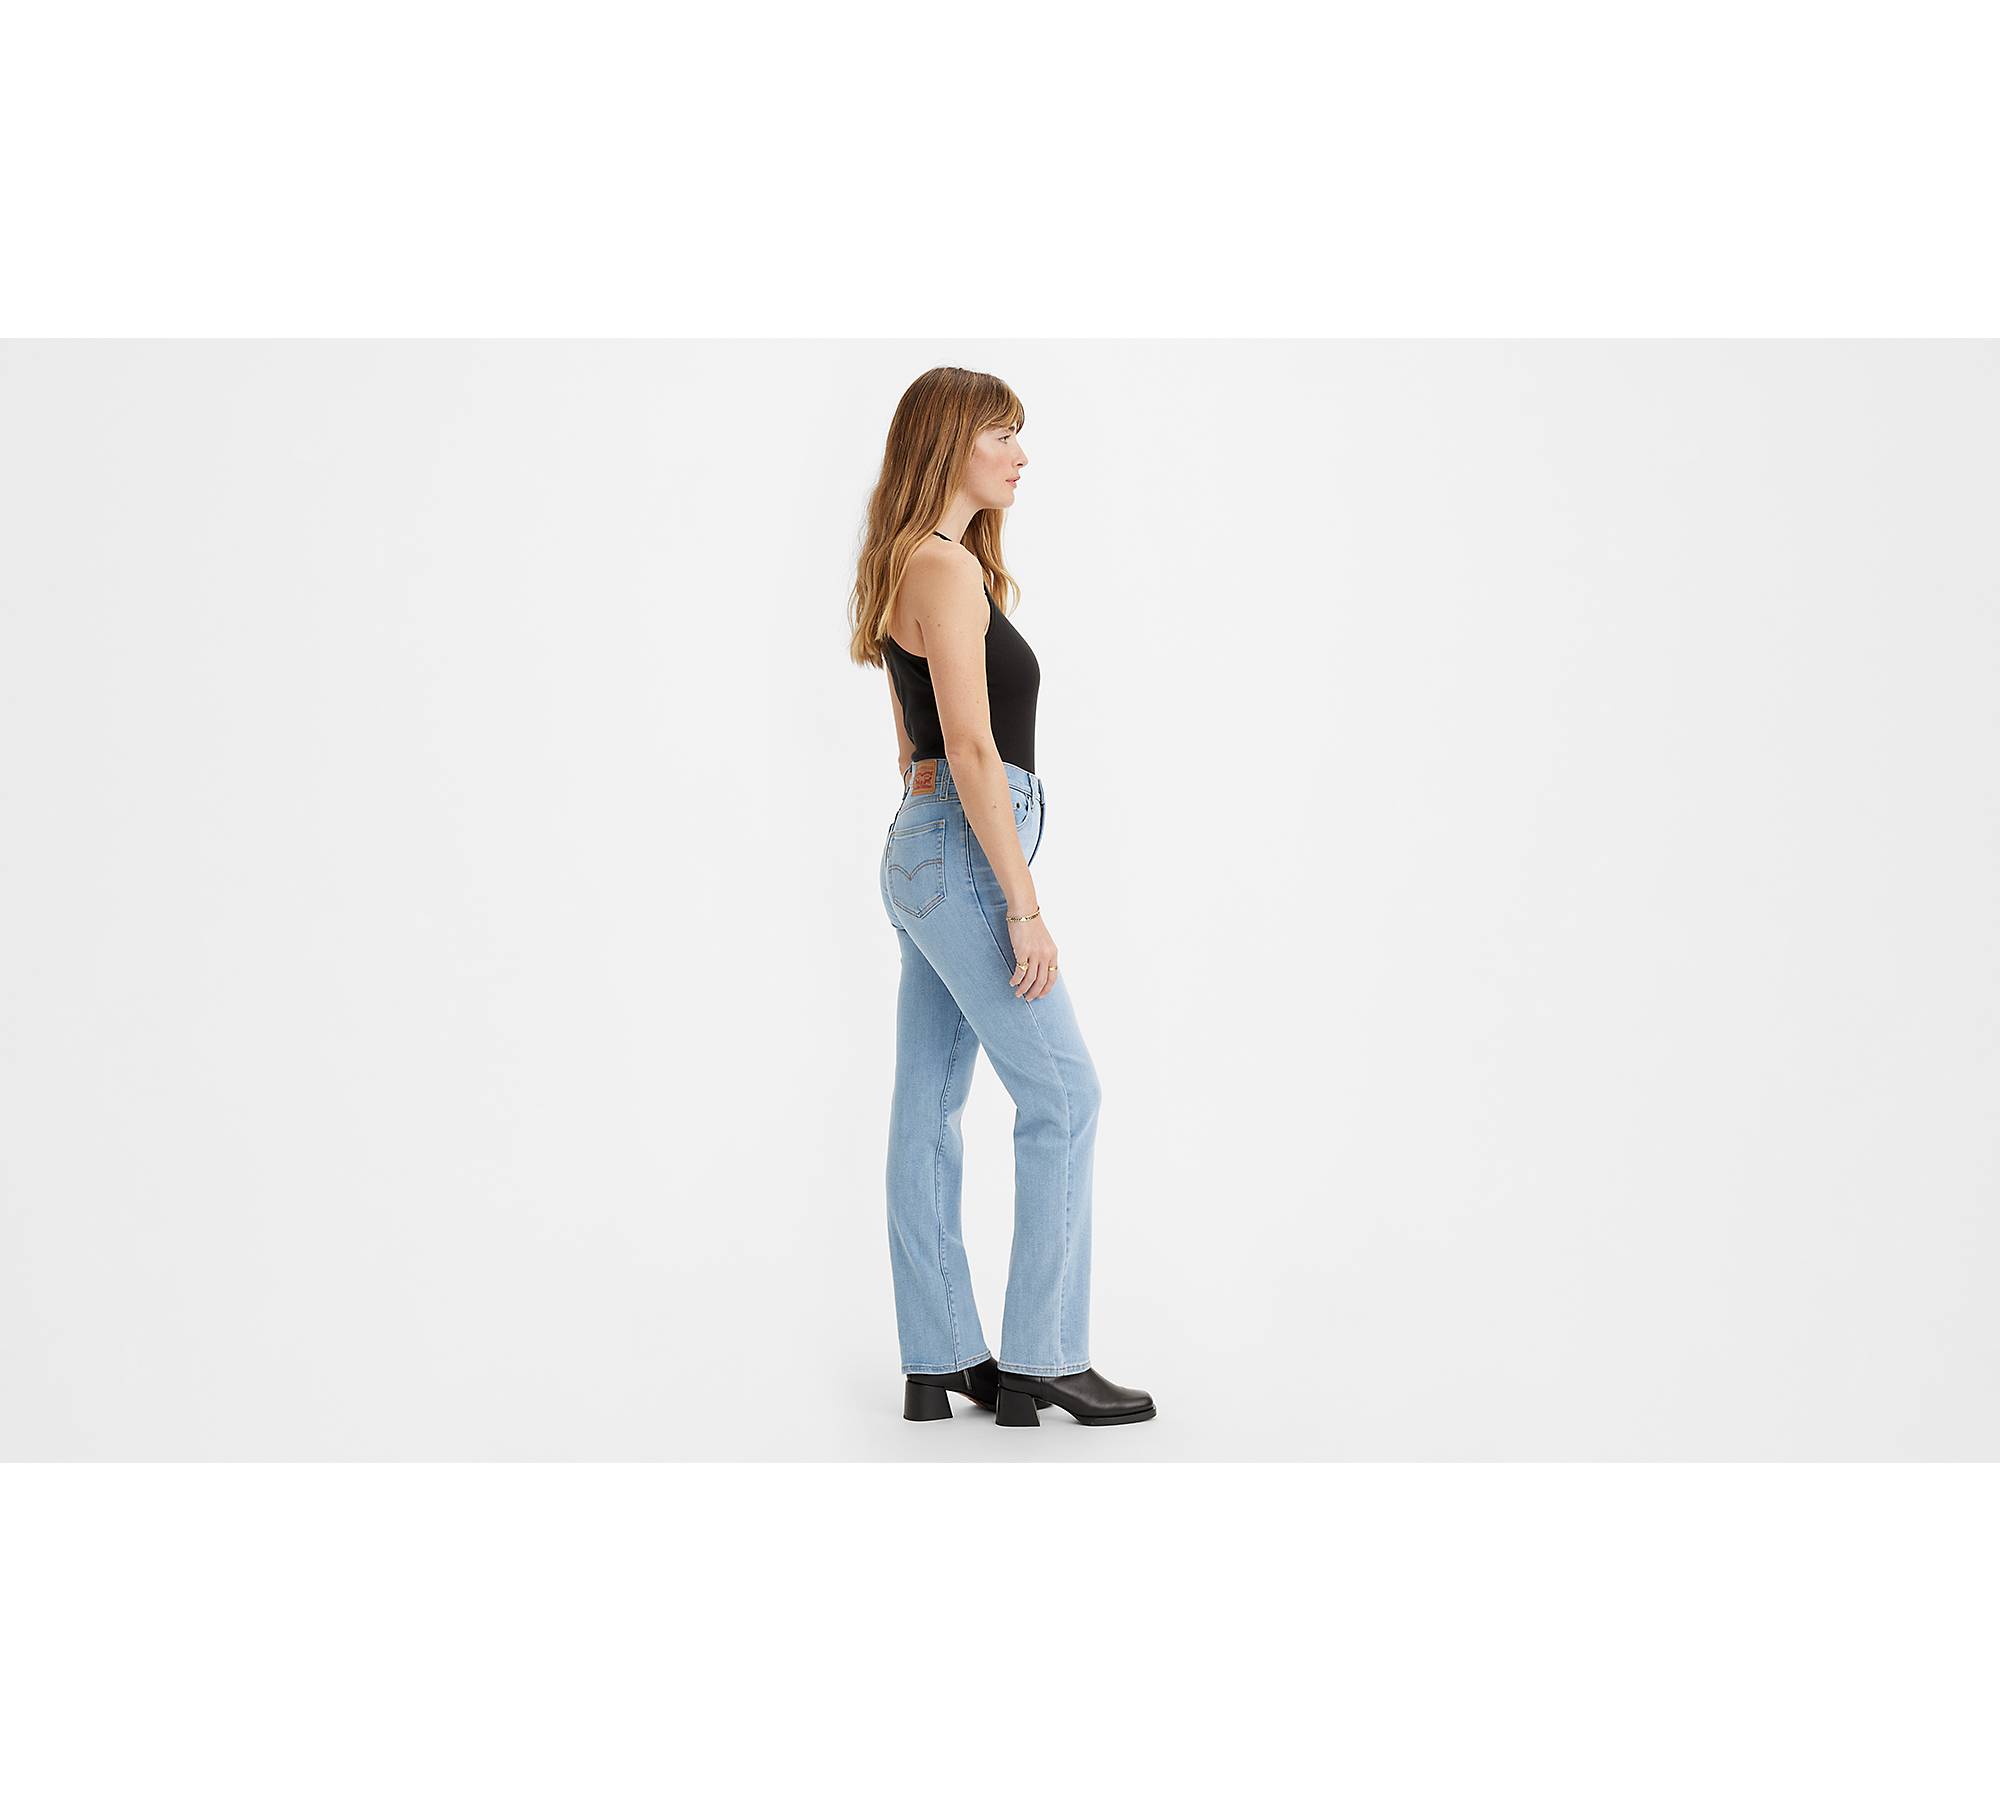 Levis 724 High Rise Straight - 18883 0182